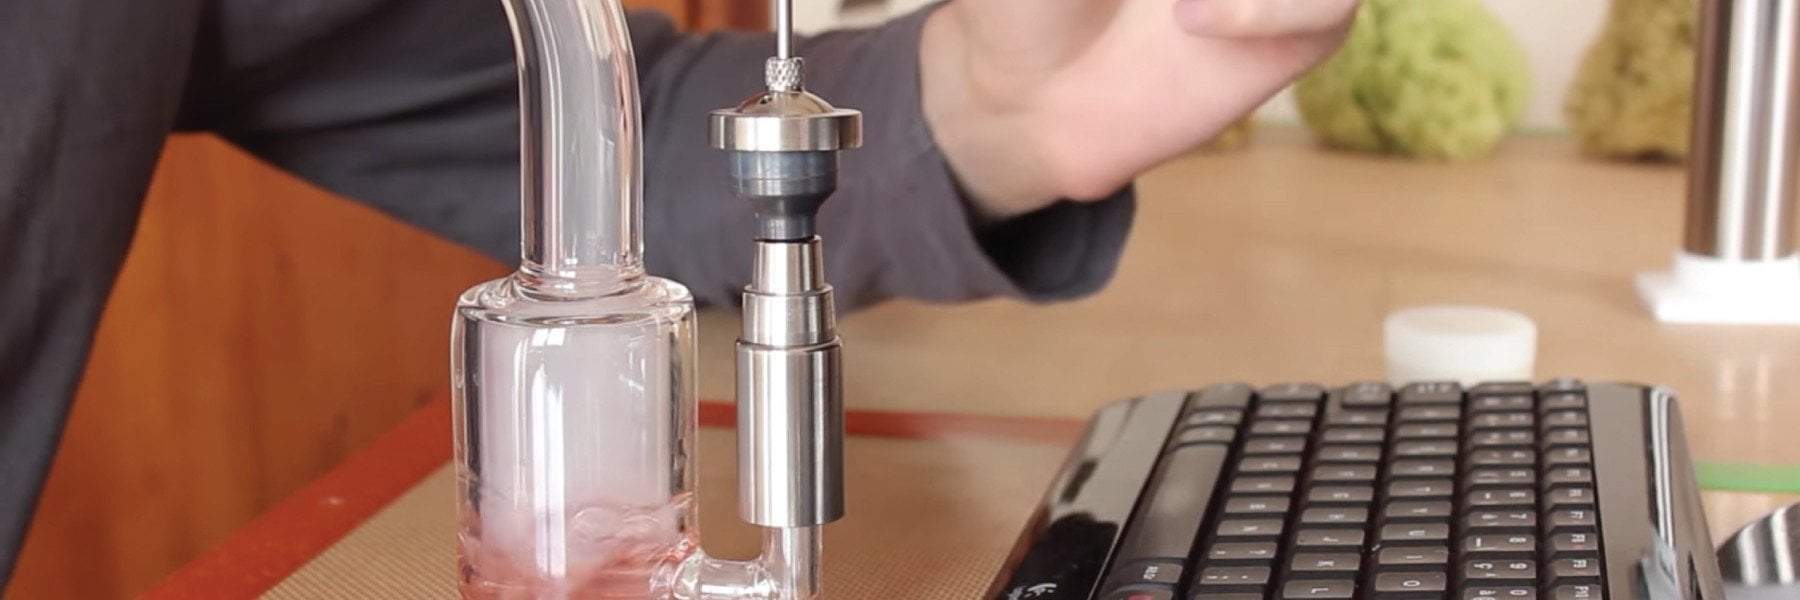 Why a carb cap is so important!